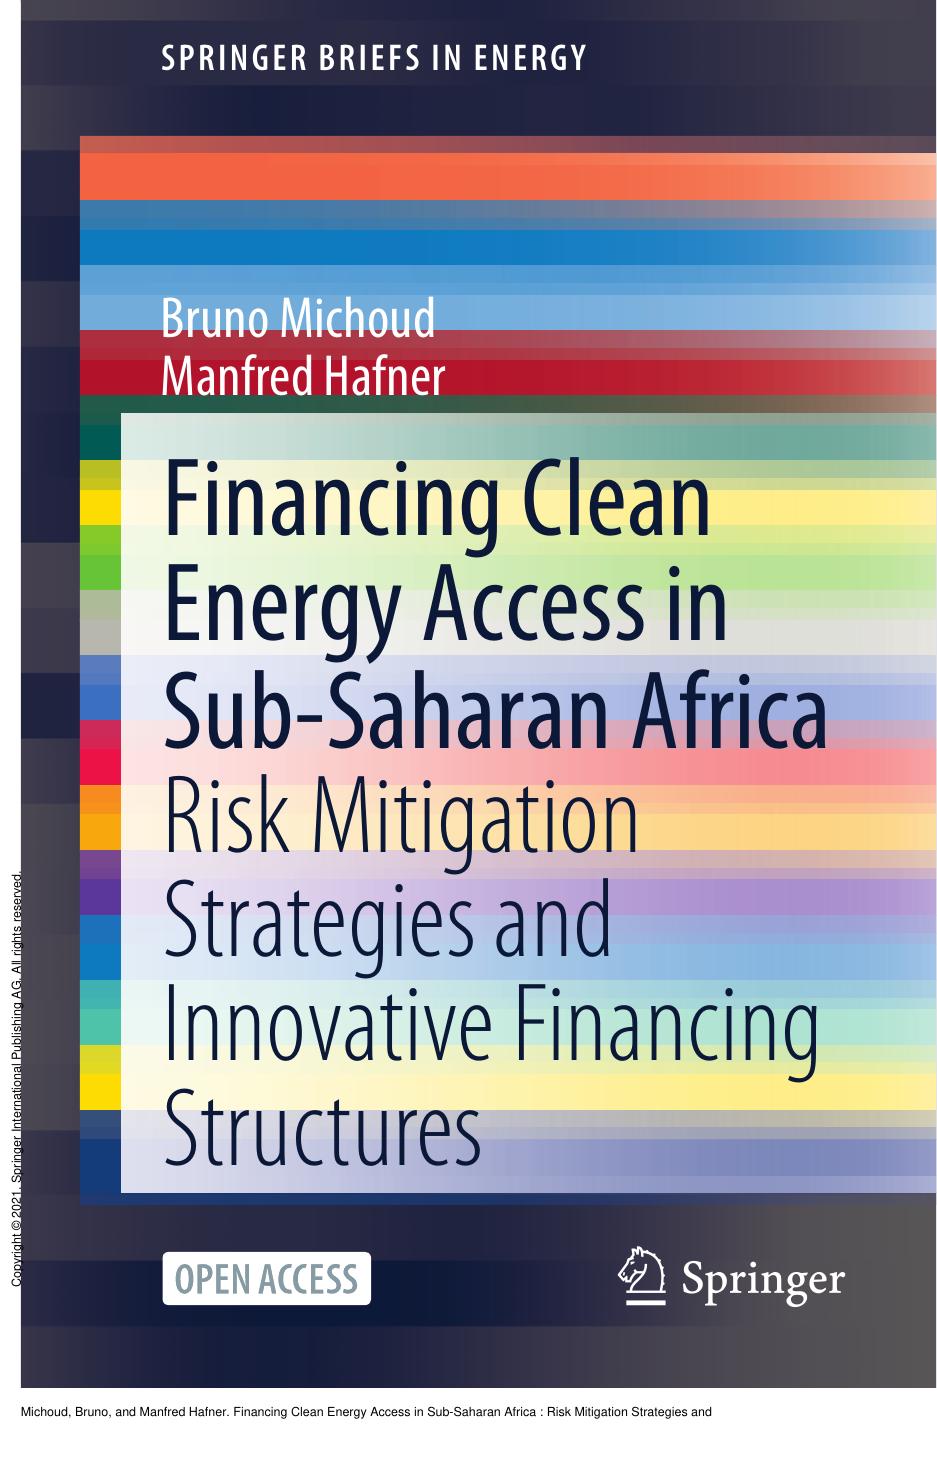 Financing Clean Energy Access in Sub-Saharan Africa : Risk Mitigation Strategies and Innovative Financing Structures by Bruno Michoud; Manfred Hafner